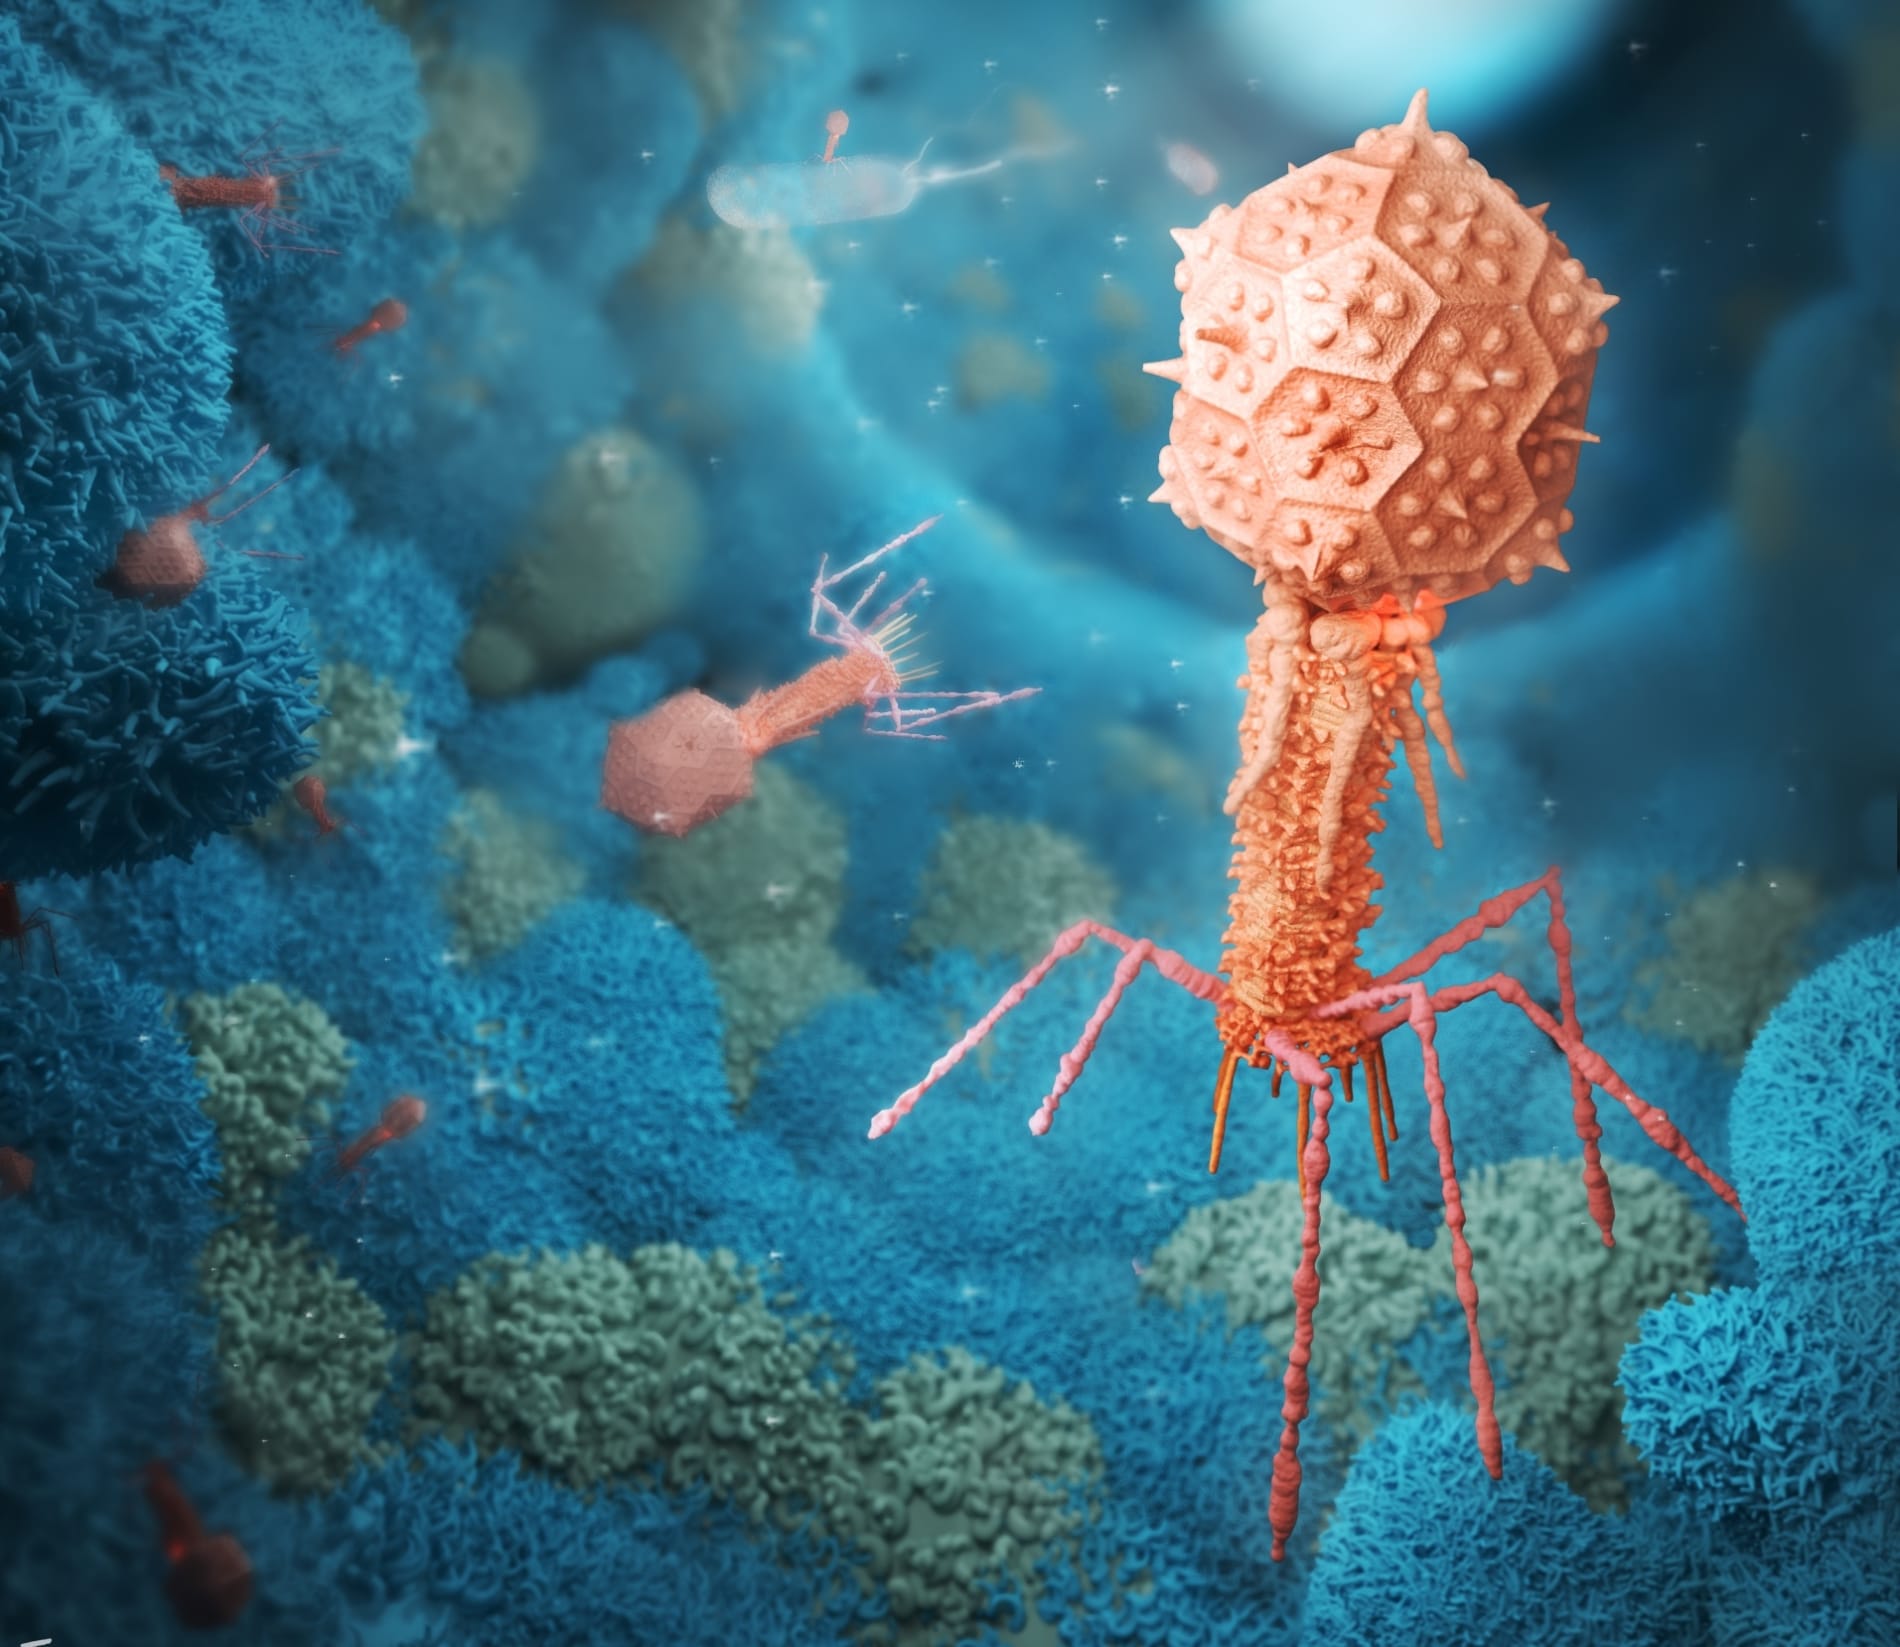 Role of bacteriophages and fighting bacteria